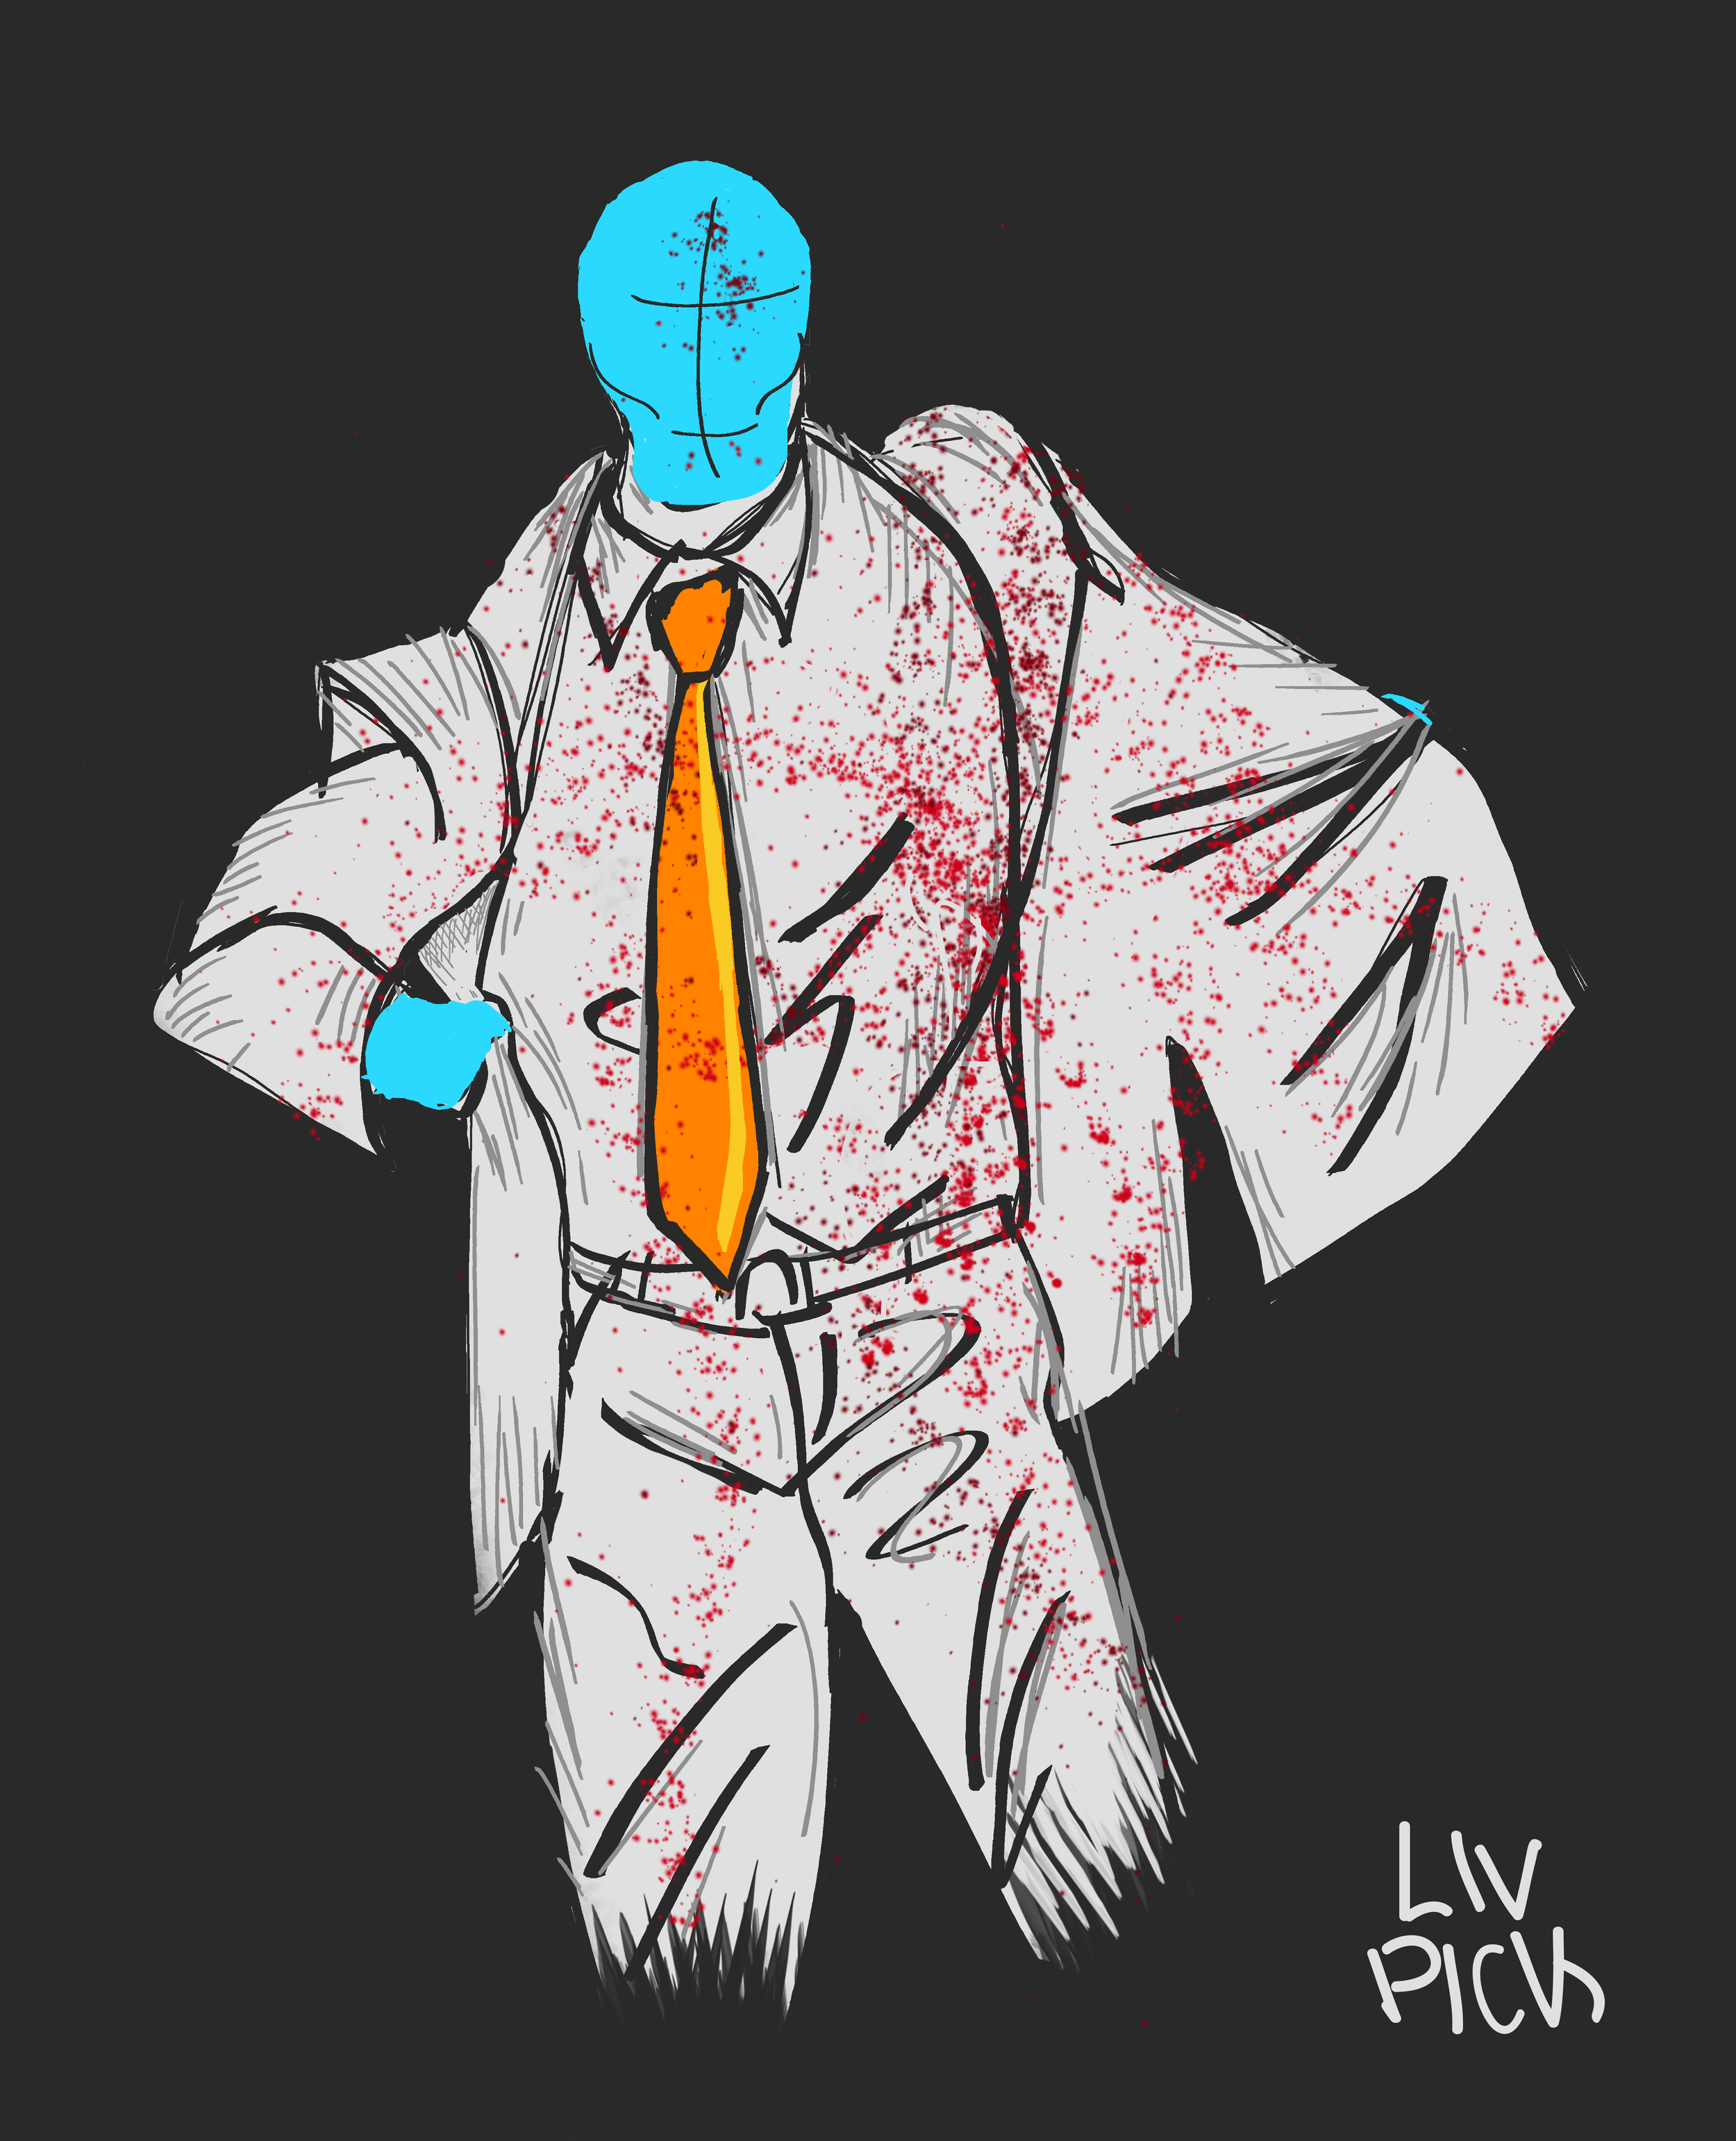 Day 2 - Suit